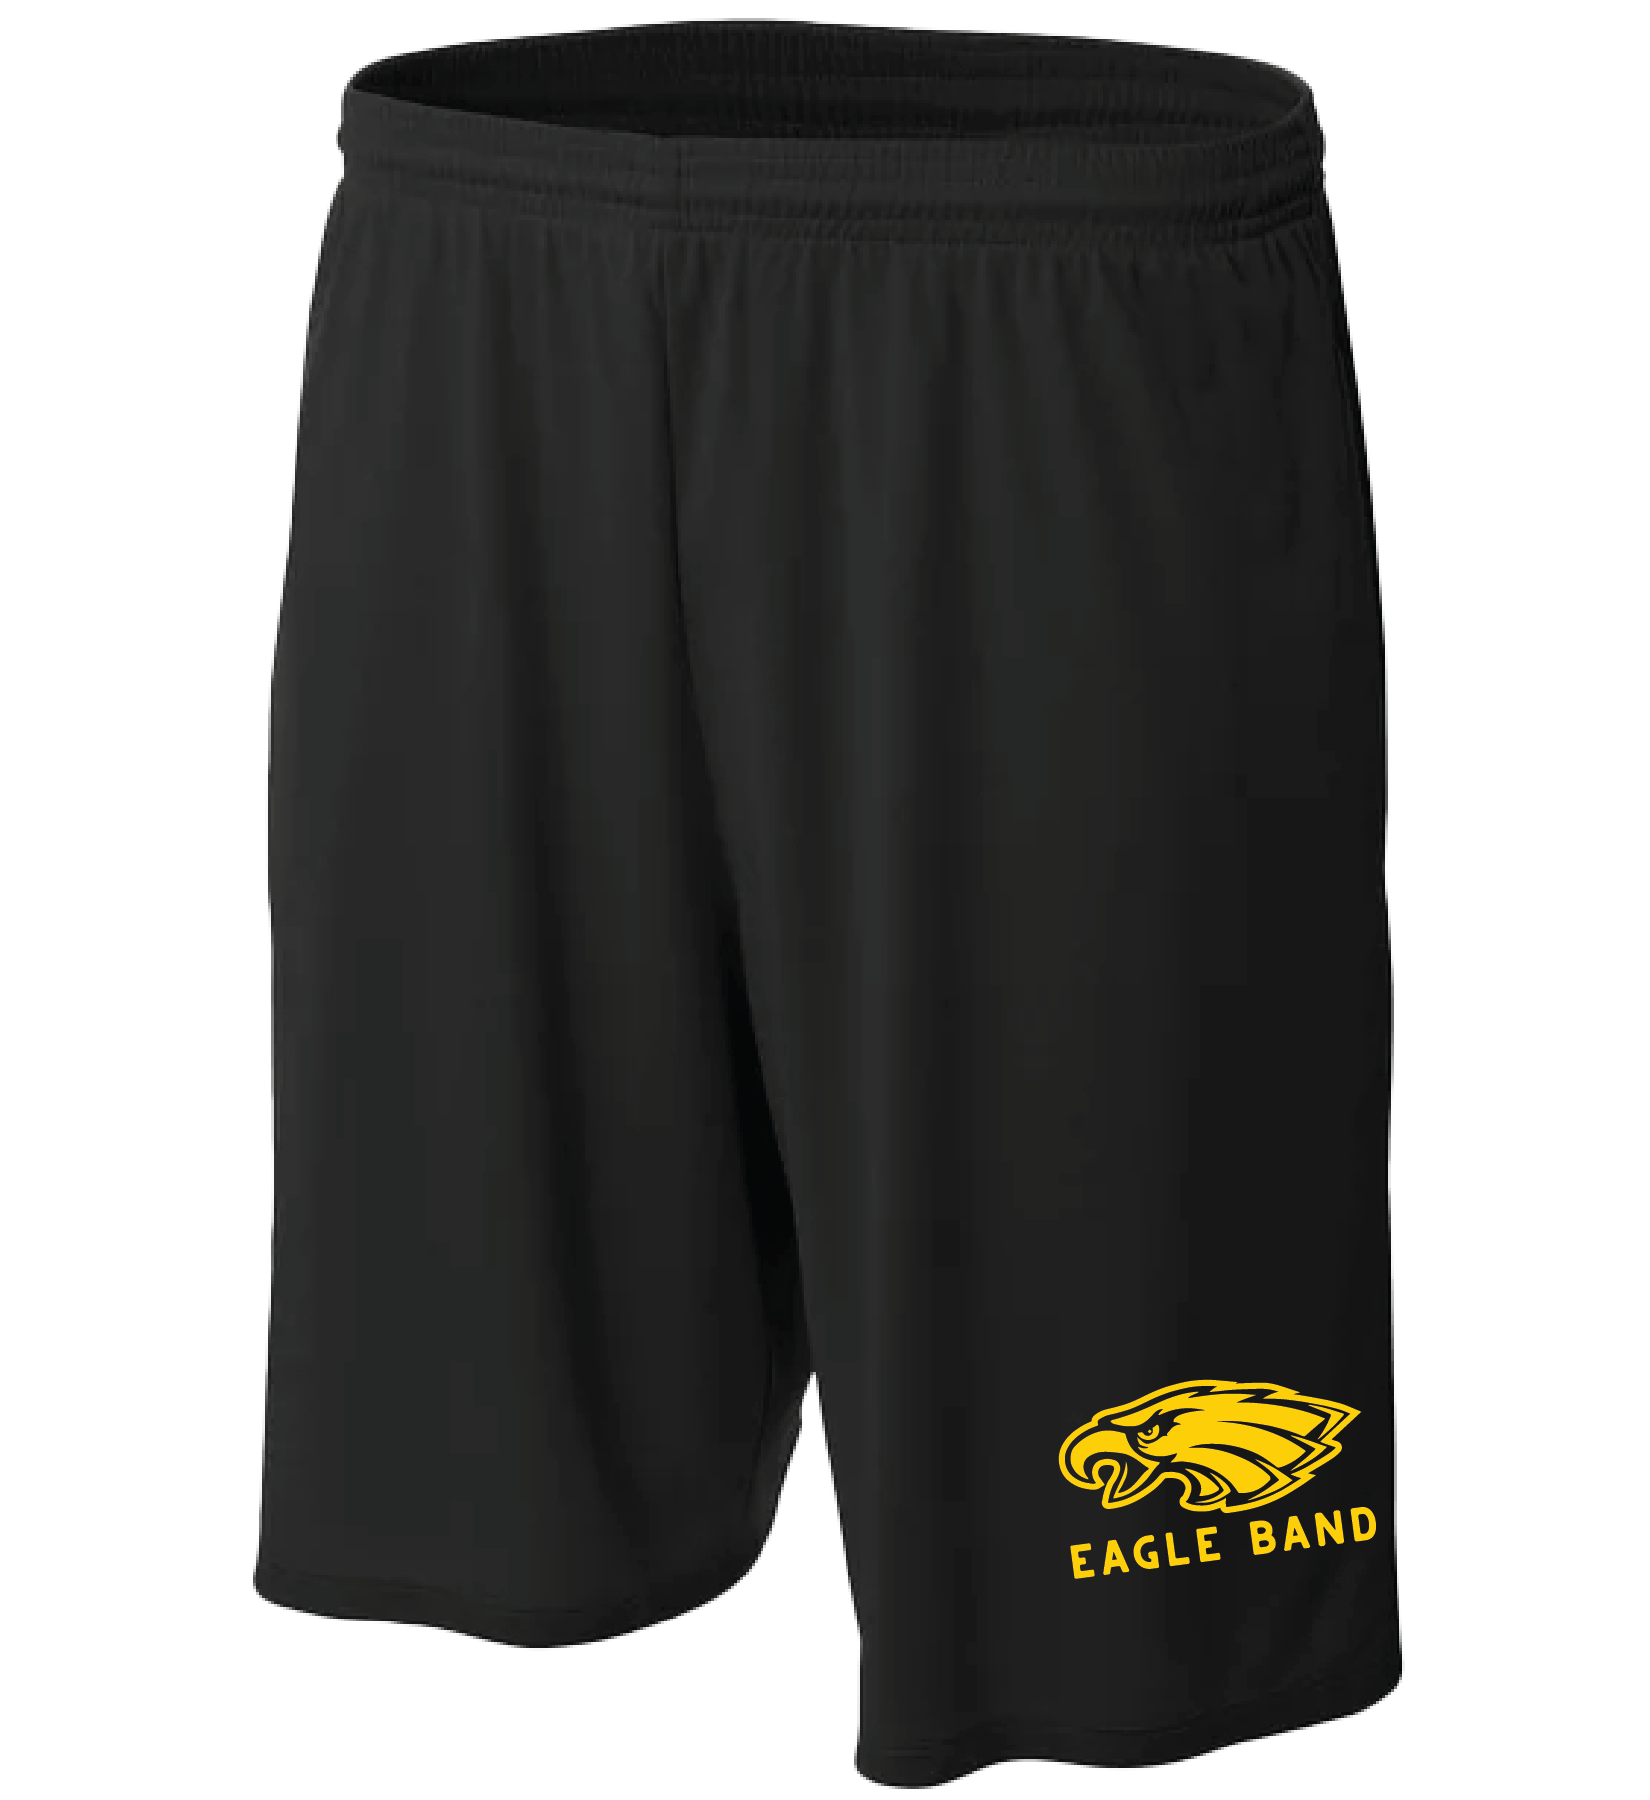 Pecos Band Men's Shorts - REQUIRED